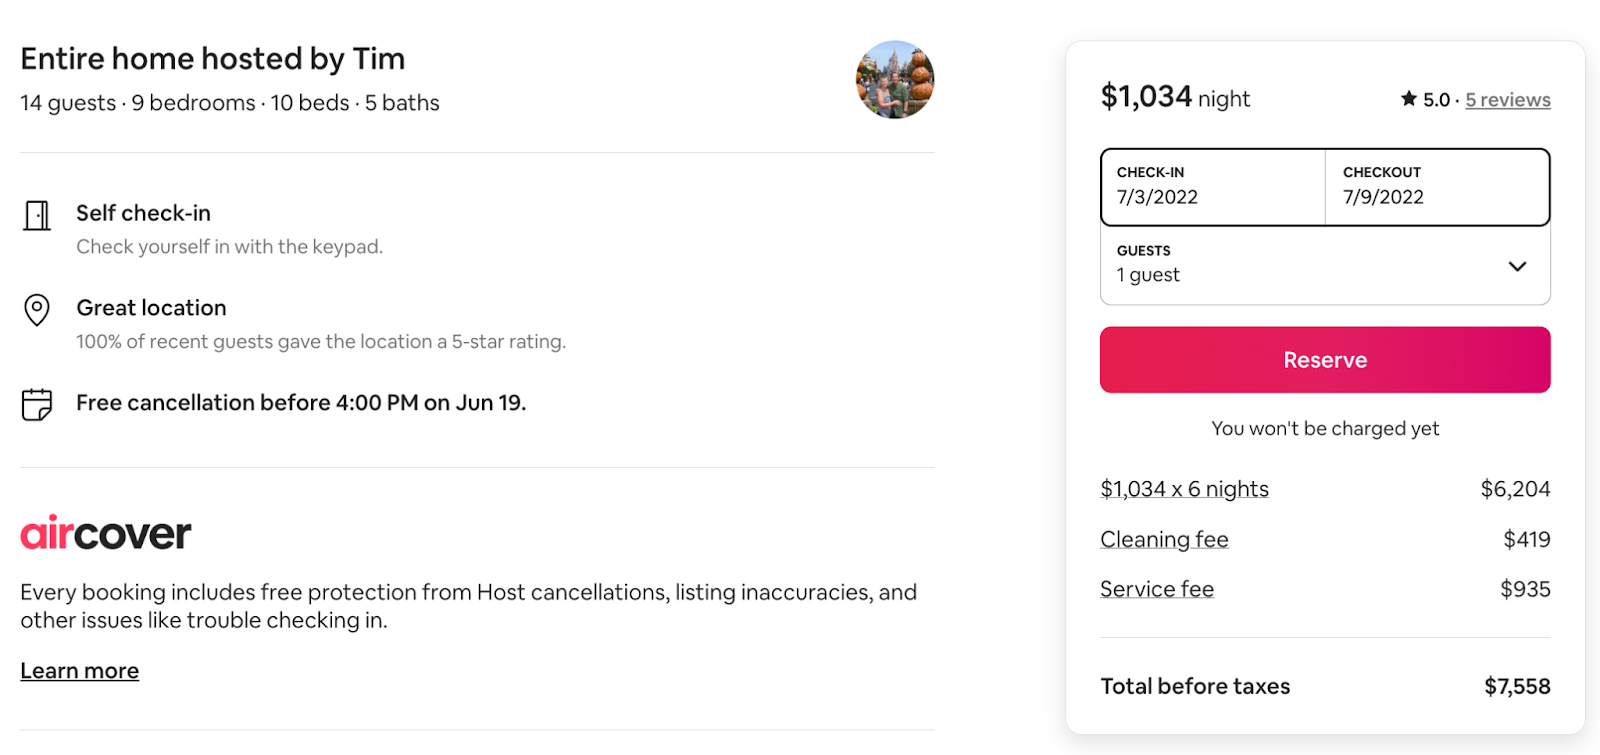 What is the average cleaning fee on Airbnb?